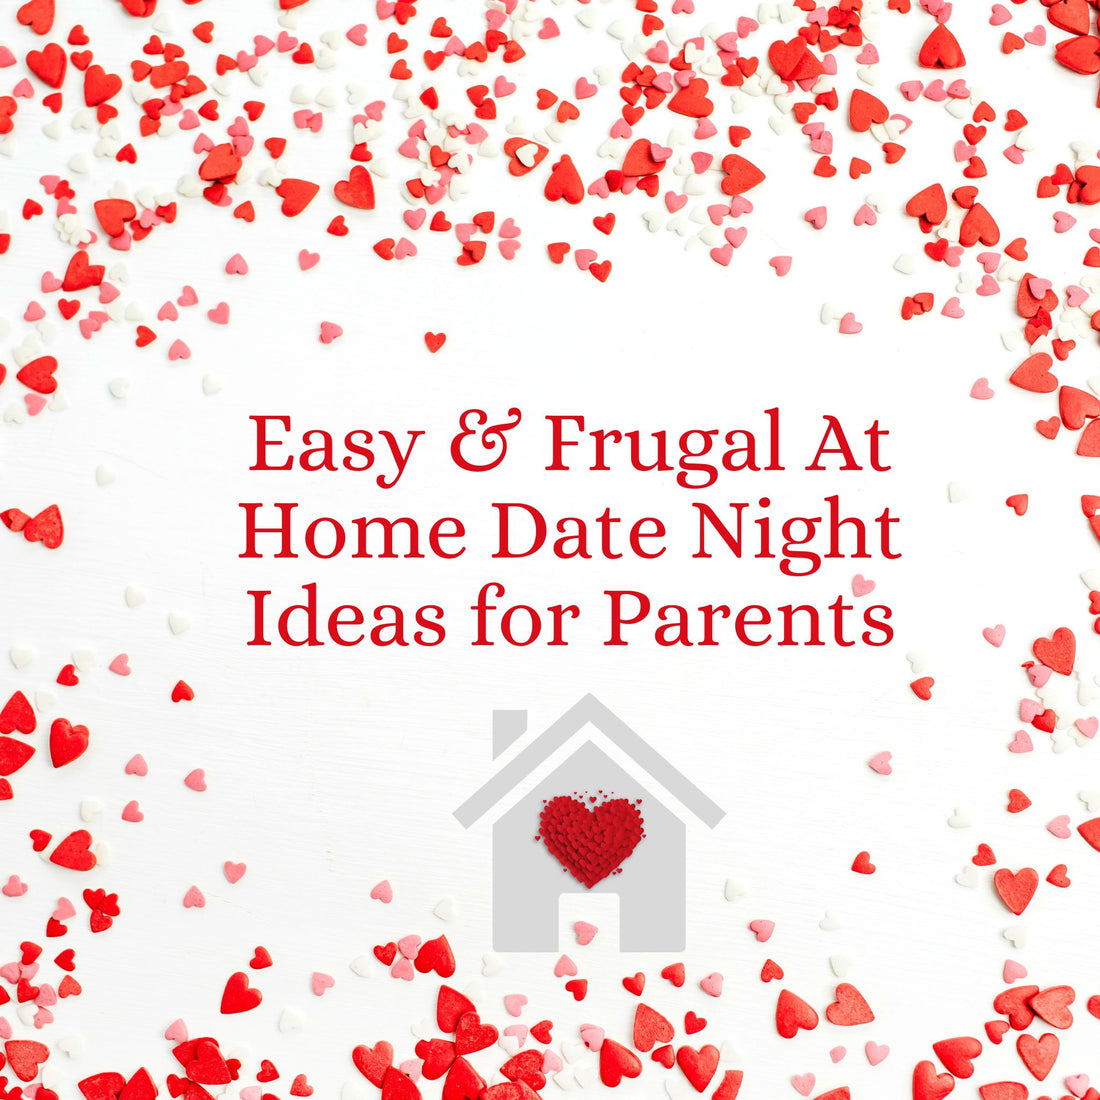 Easy and Frugal at Home Date Night Ideas for Parents